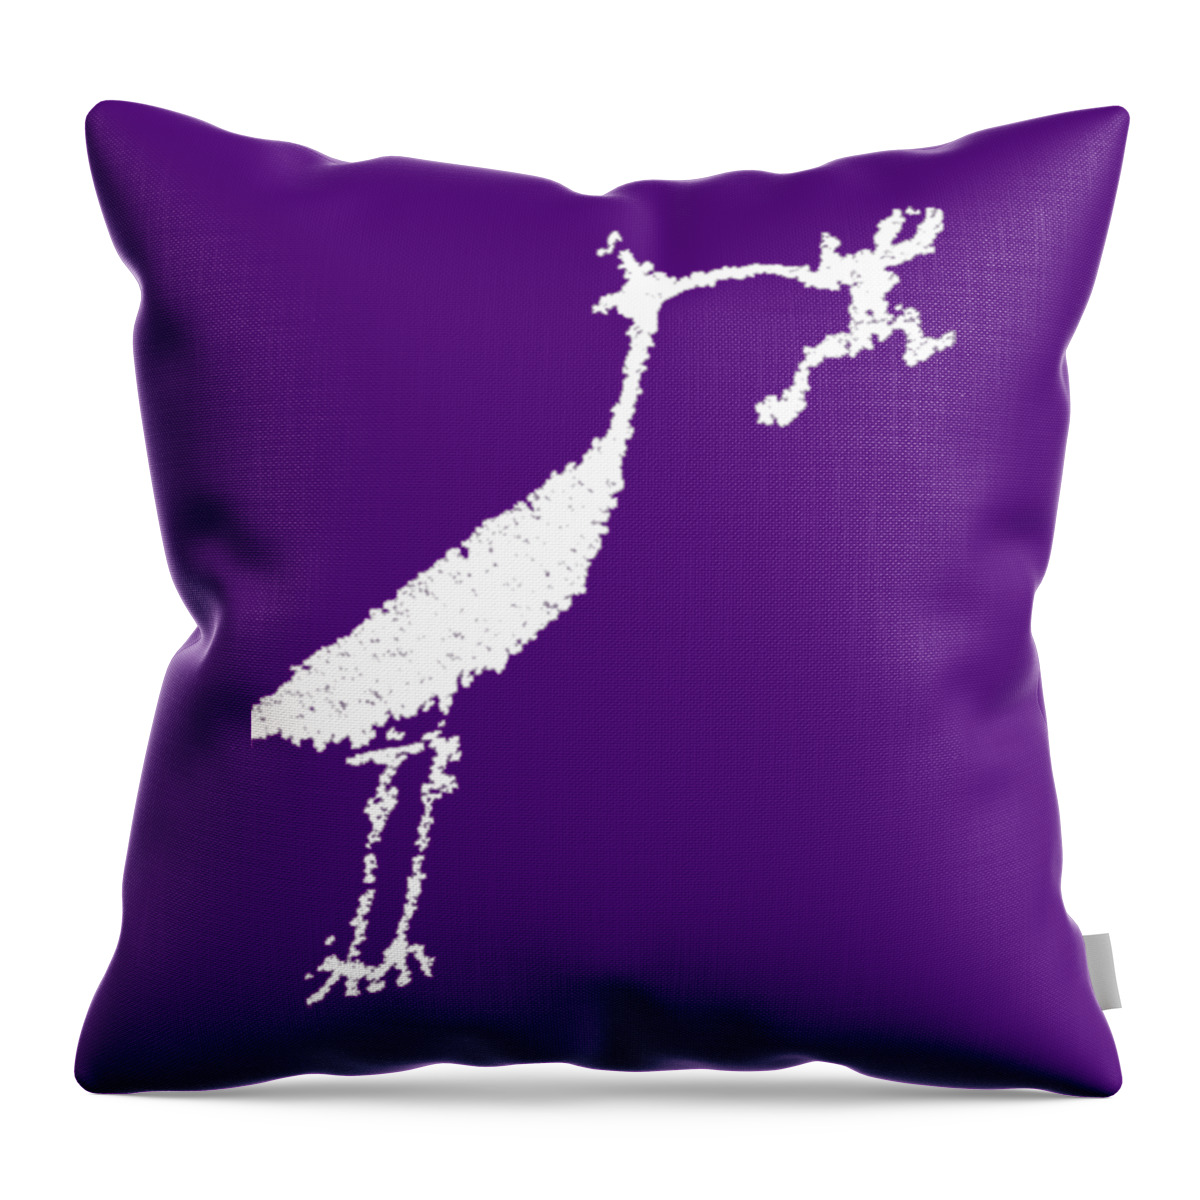 Petroglyph Throw Pillow featuring the photograph White Petroglyph by Melany Sarafis